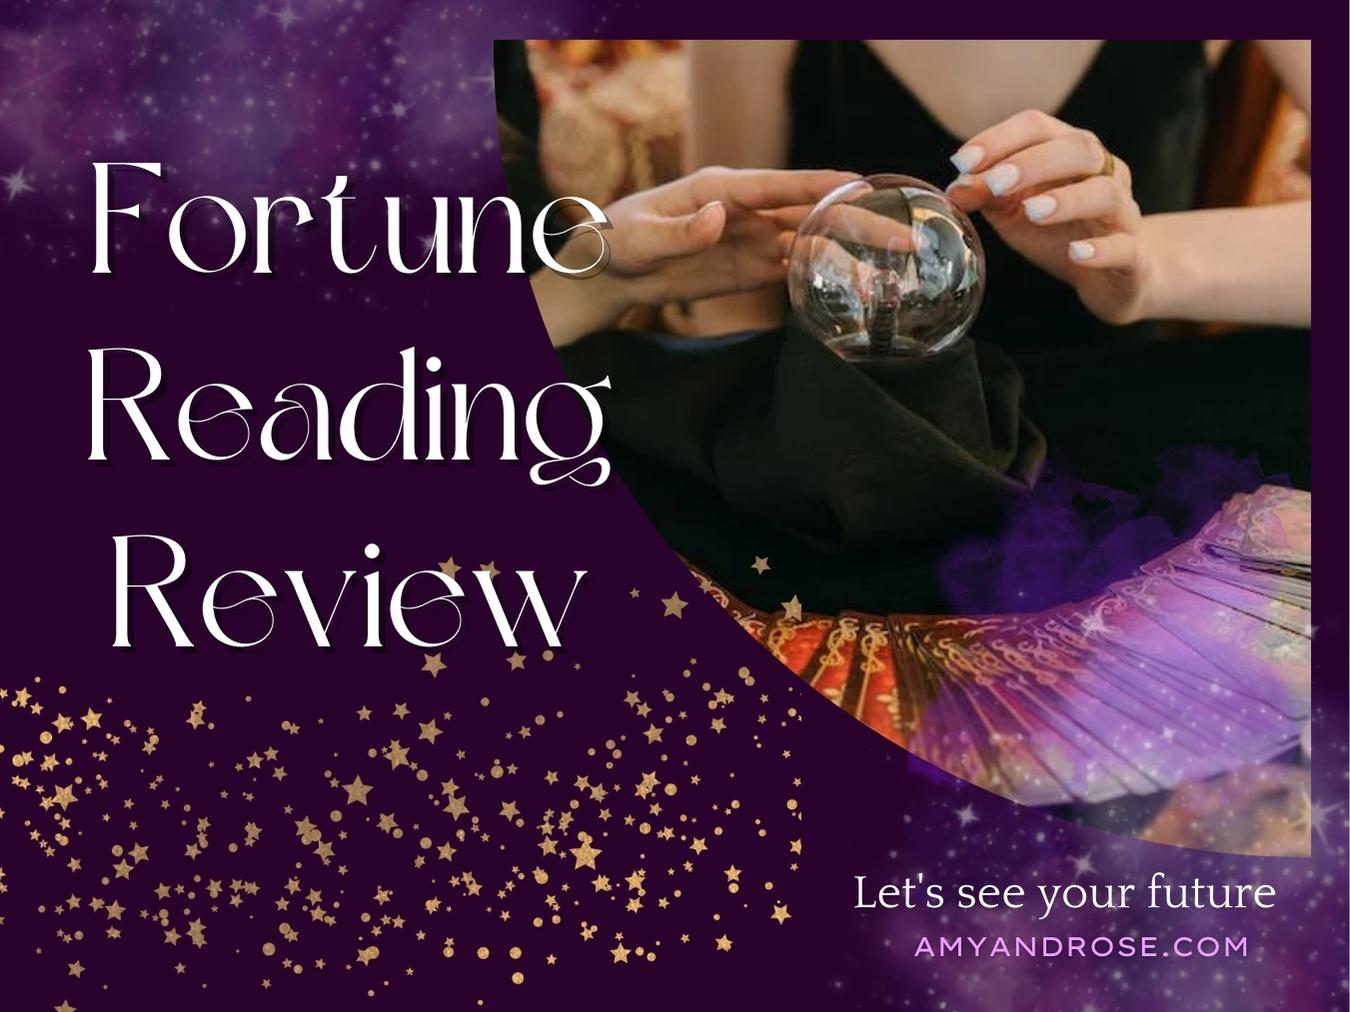 Fortune Reading Review